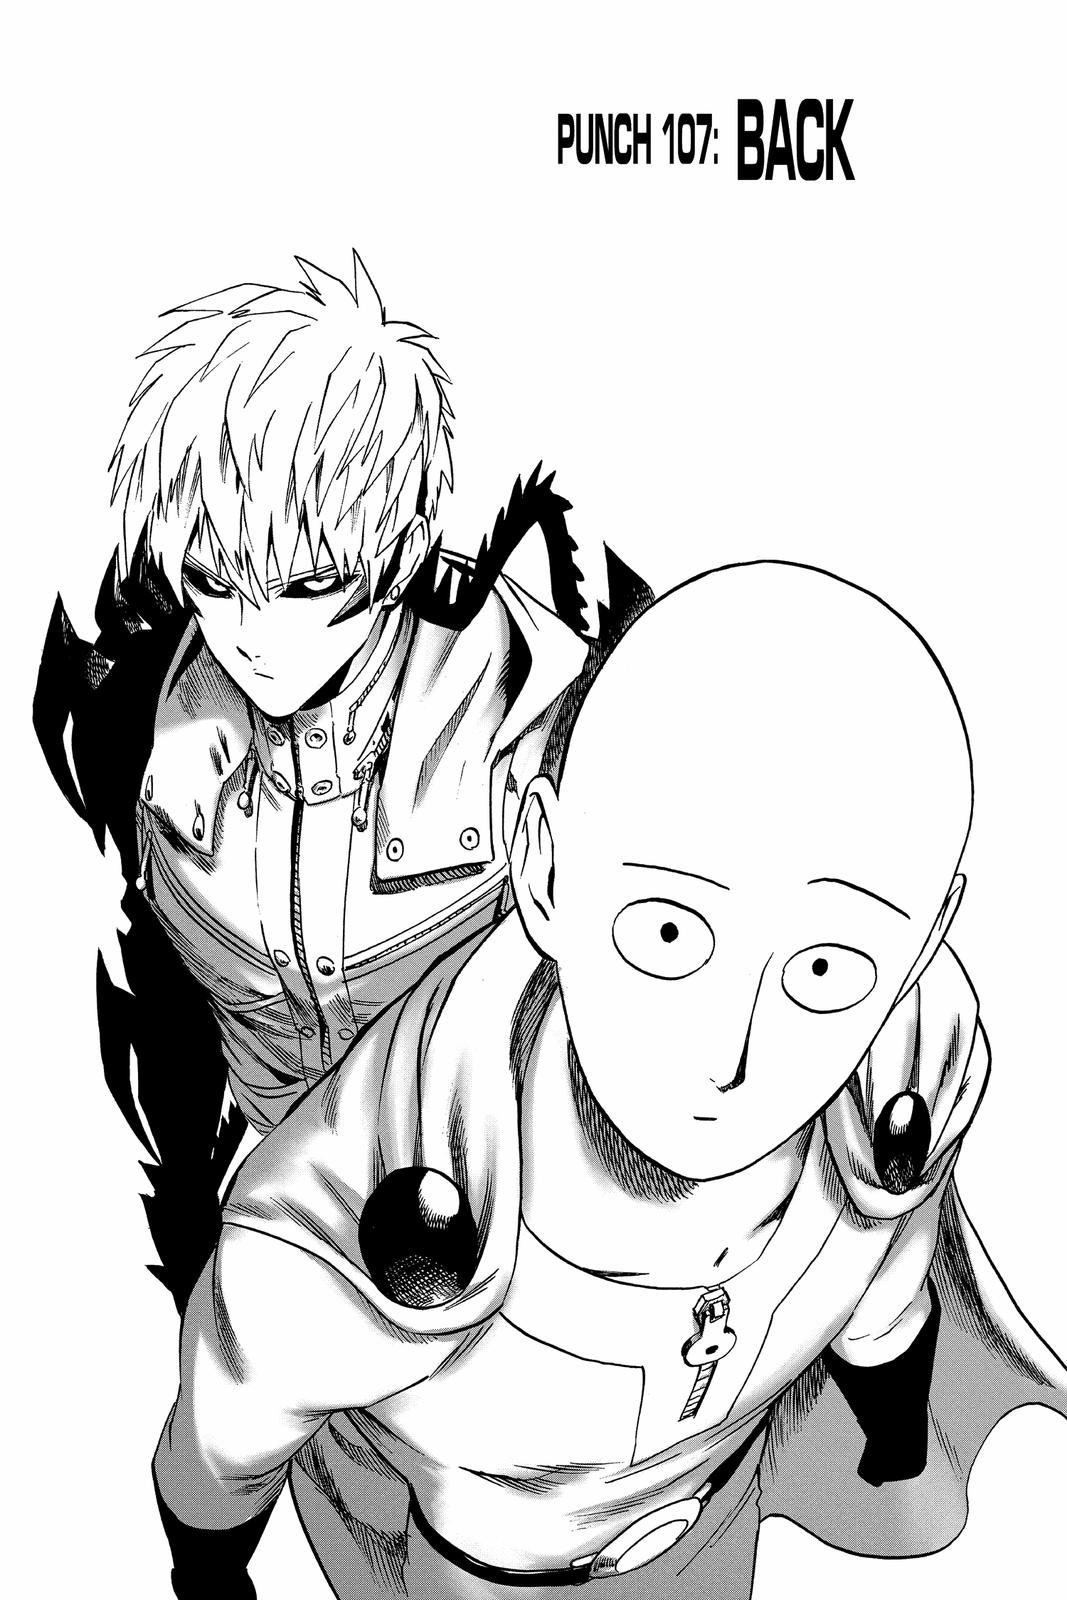 One-Punch Man, Punch 107 image 07